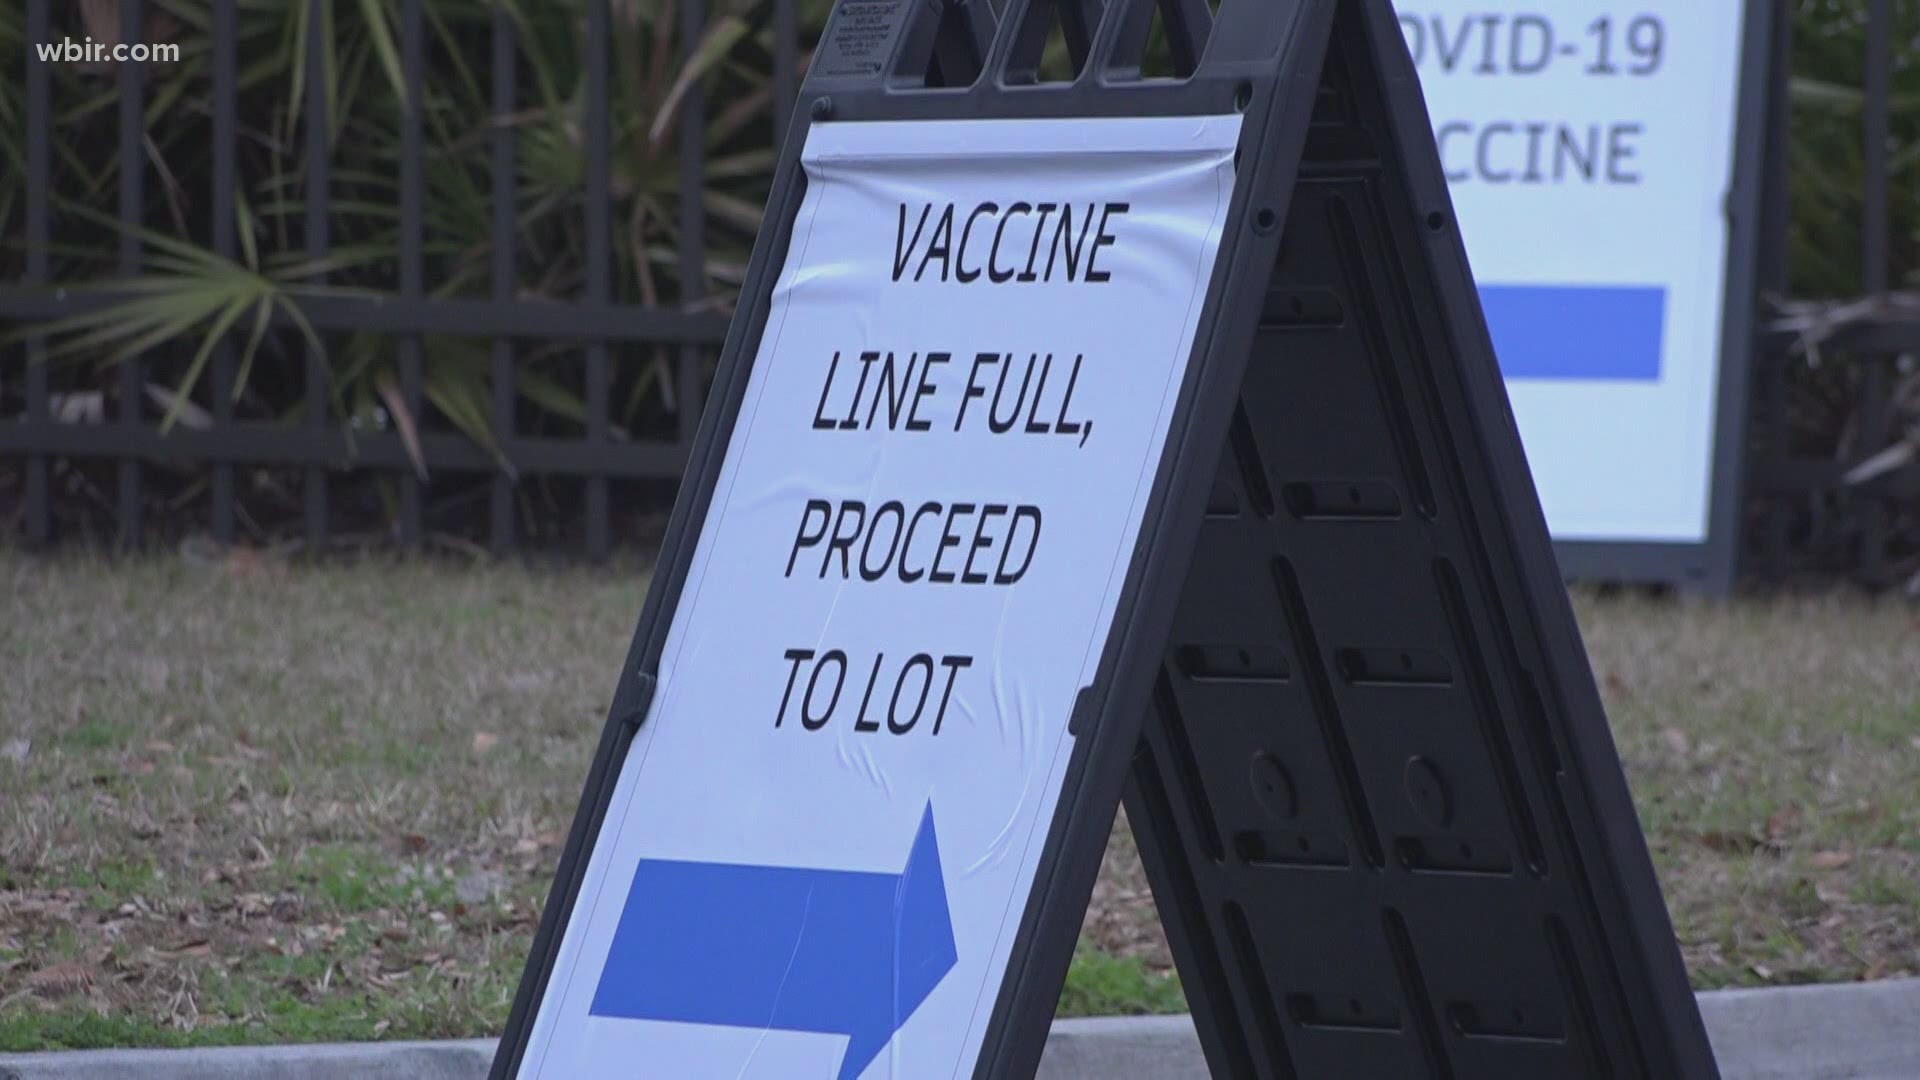 Long lines and a lack of appointment availabilities is driving some people to look for the COVID-19 vaccine outside of Knox County.